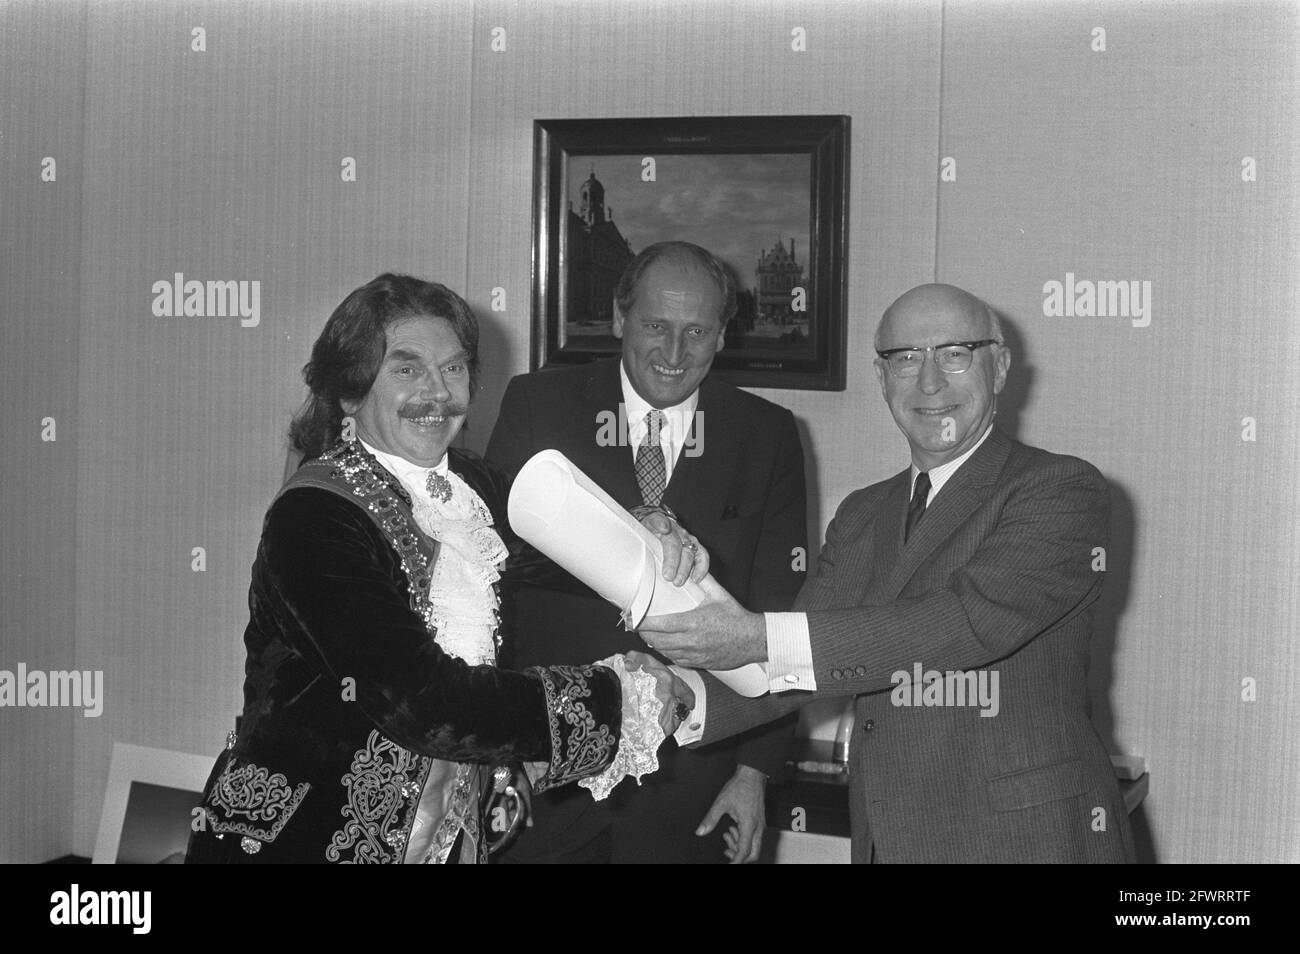 Czaar Peter ( ir. K. K. van Hoffen of Stork werkspoor Diesel) received by Mayor Samkalden at town hall, 28 September 1972, receptions, town halls, The Netherlands, 20th century press agency photo, news to remember, documentary, historic photography 1945-1990, visual stories, human history of the Twentieth Century, capturing moments in time Stock Photo